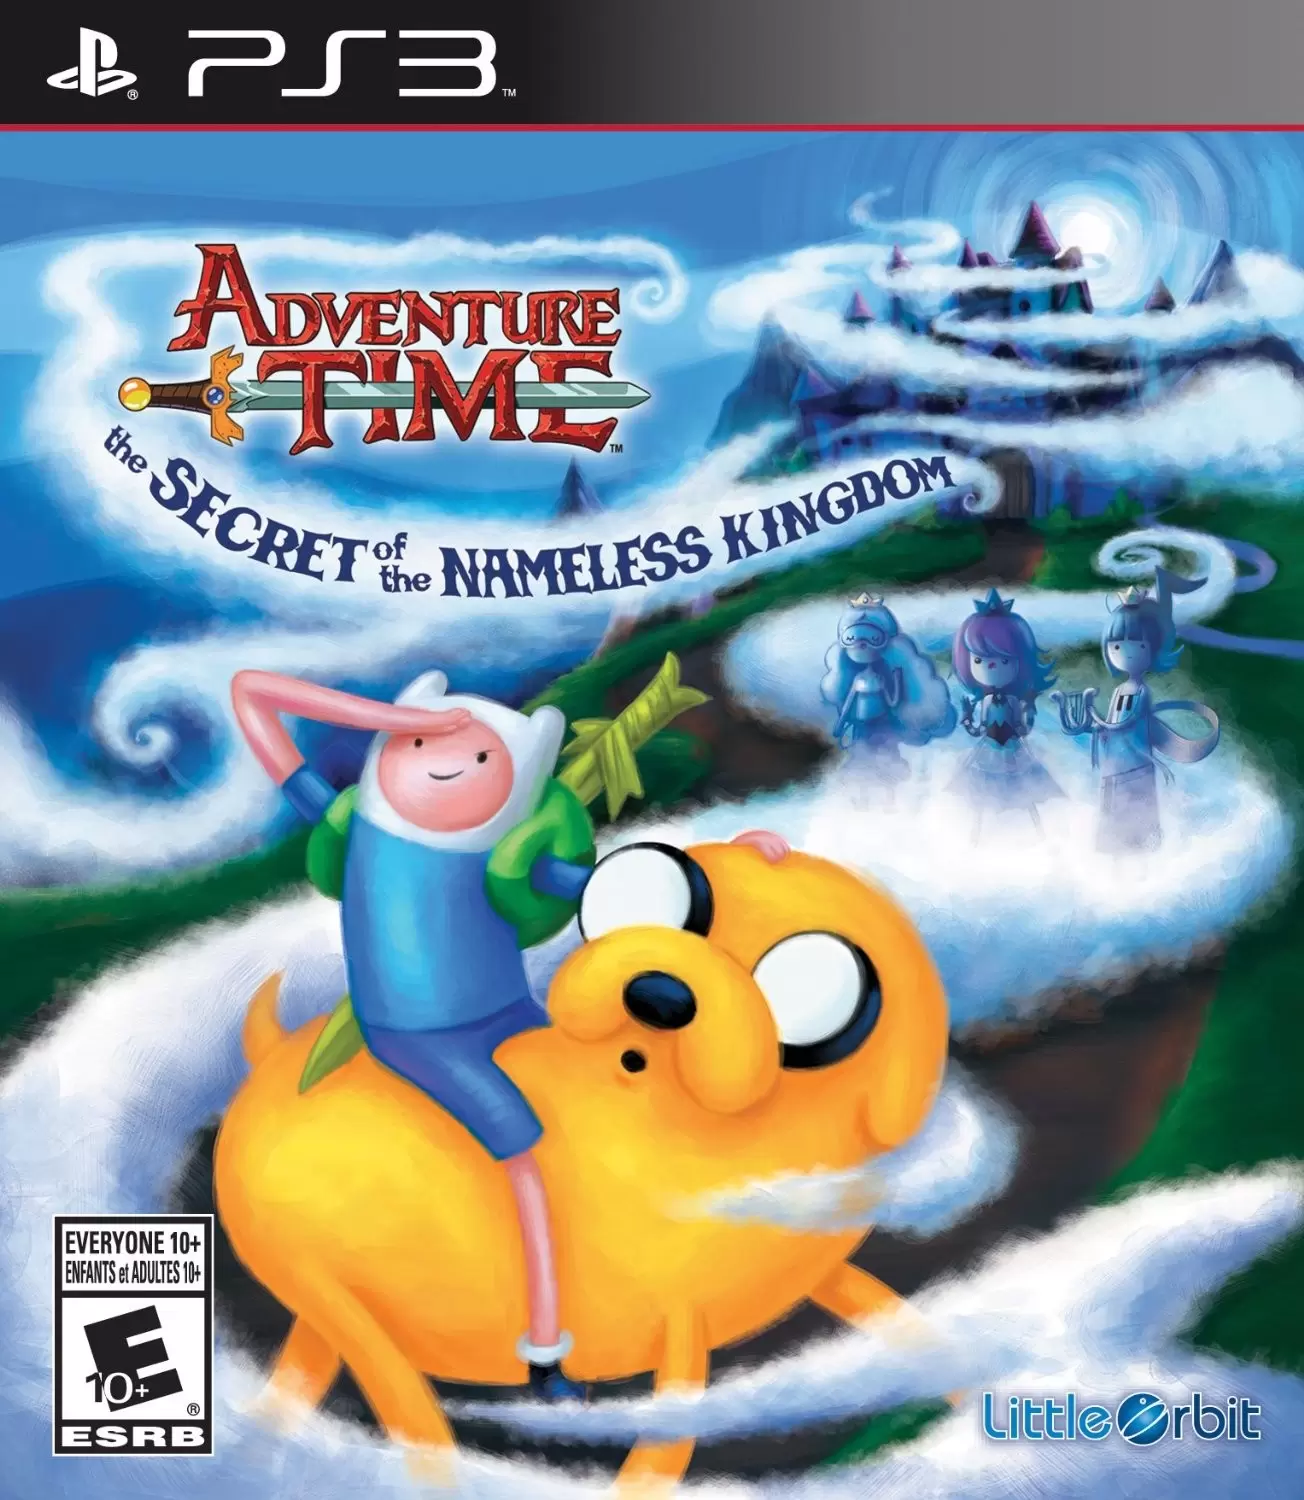 PS3 Games - Adventure Time: The Secret of the Nameless Kingdom